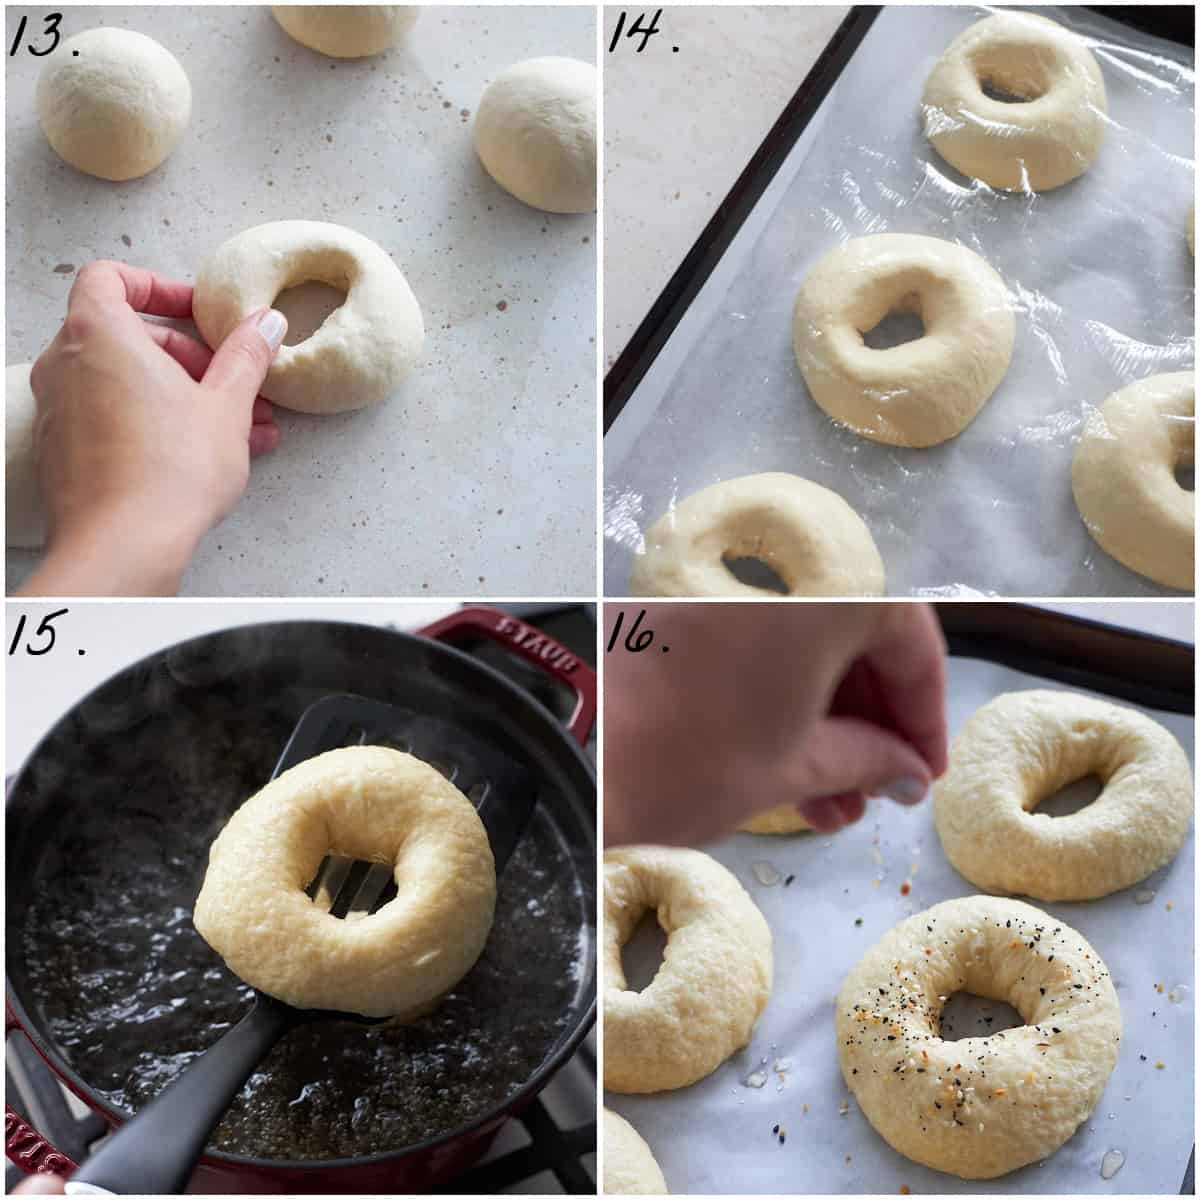 four process photos showing how to shape the bagels, rest them on a tray, boil them and add the toppings. 